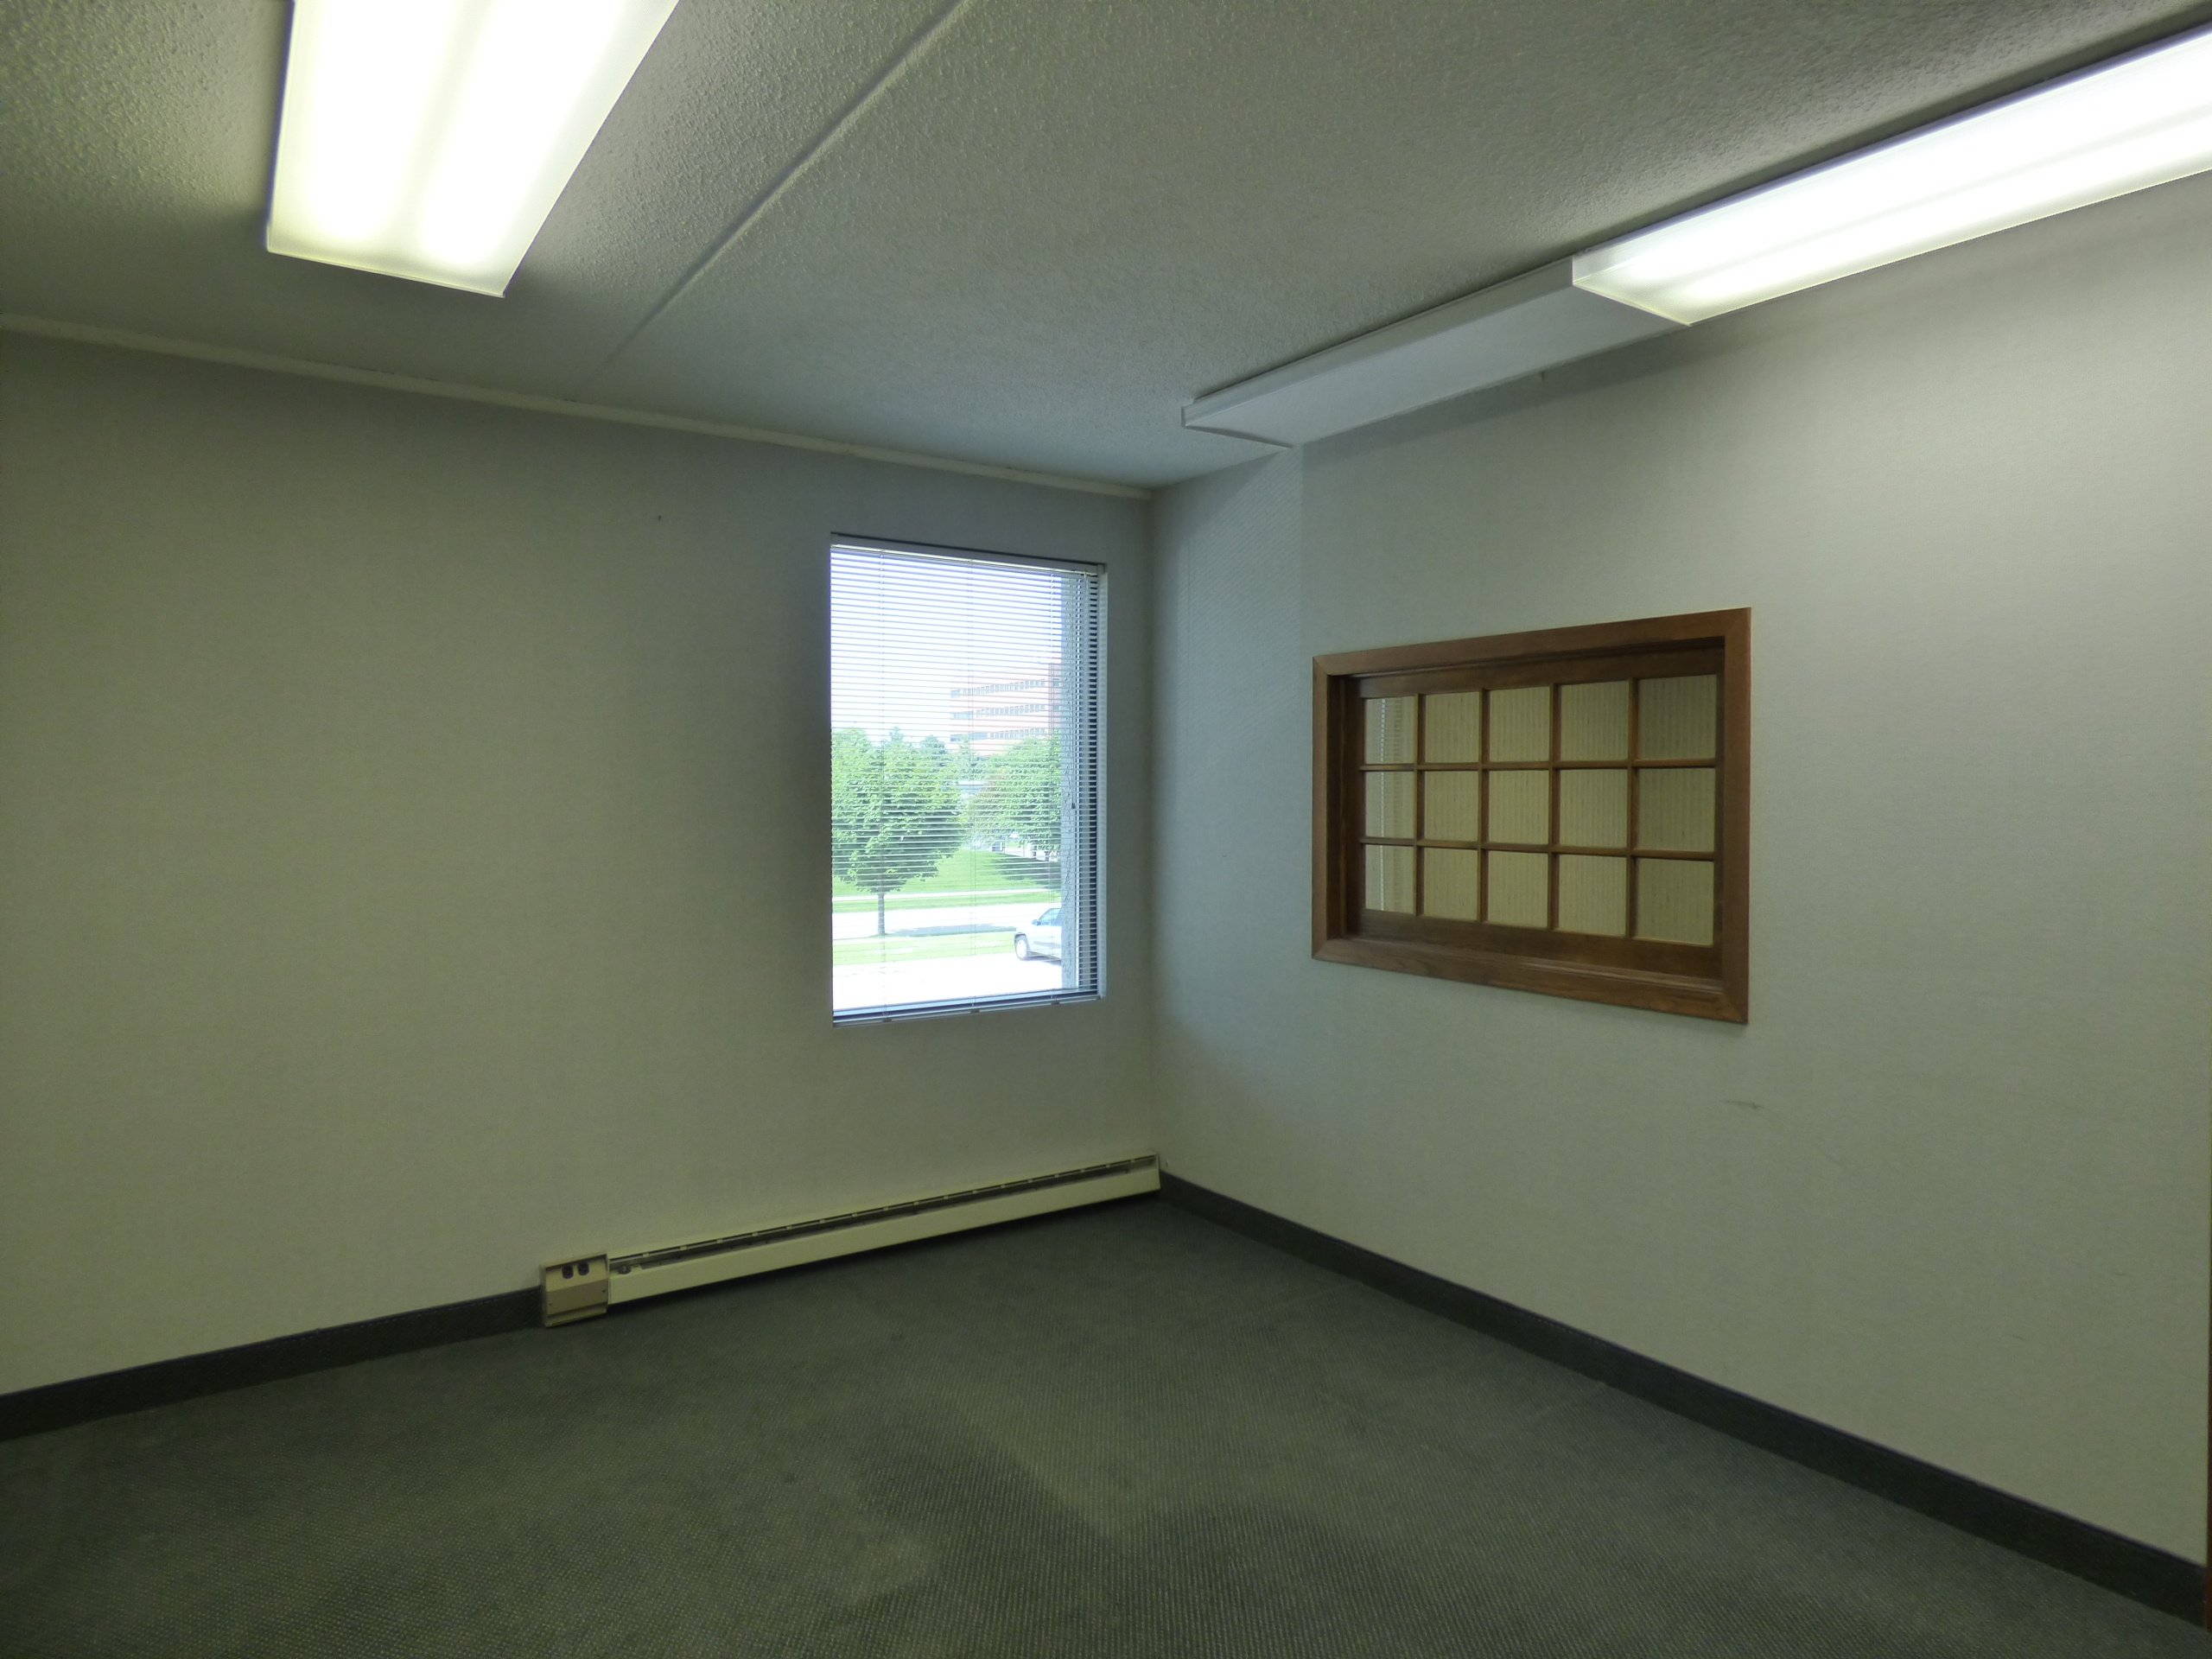 rent an office in Apple Valley MN now.jpg